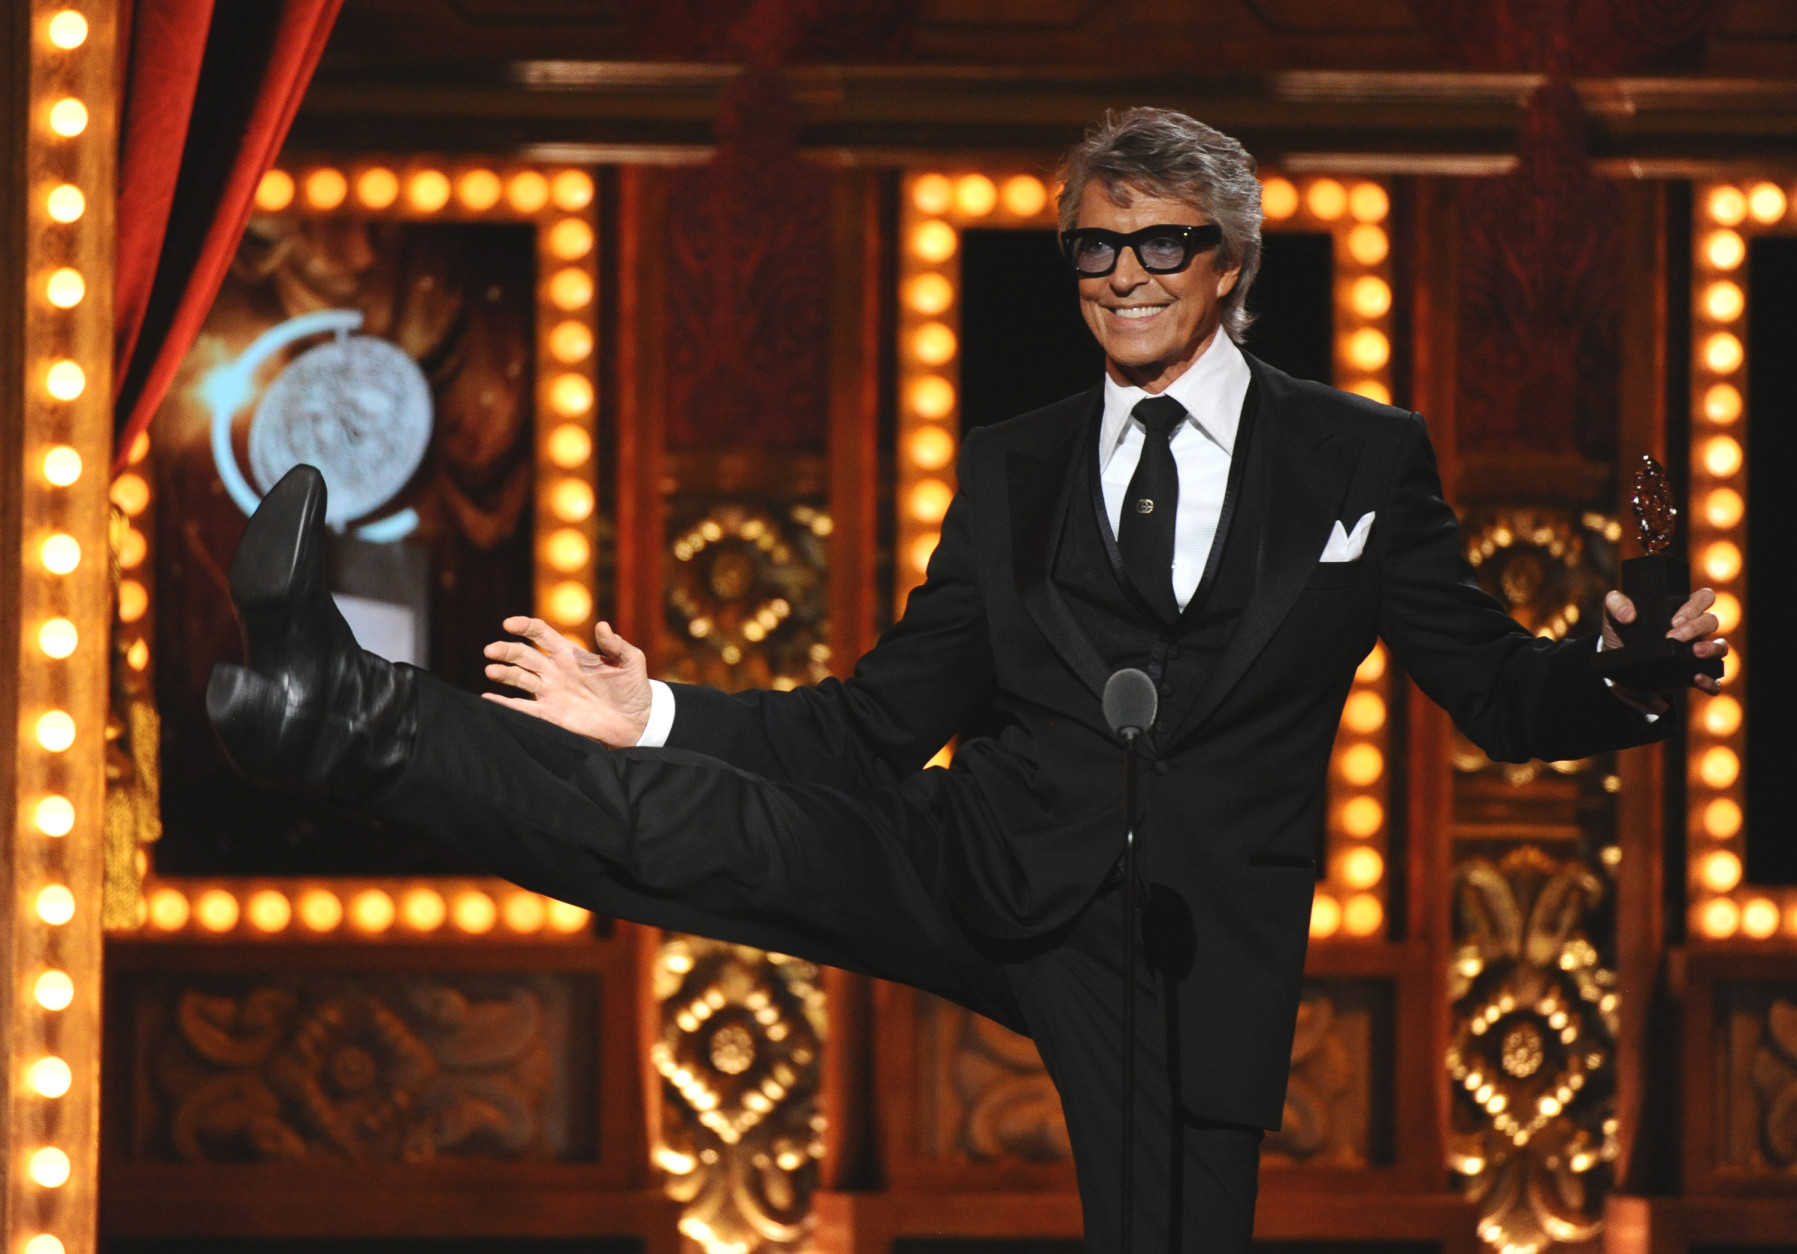 Tommy Tune accepts the Tony for lifetime achievement award at the 69th annual Tony Awards at Radio City Music Hall on Sunday, June 7, 2015, in New York. (Photo by Charles Sykes/Invision/AP)